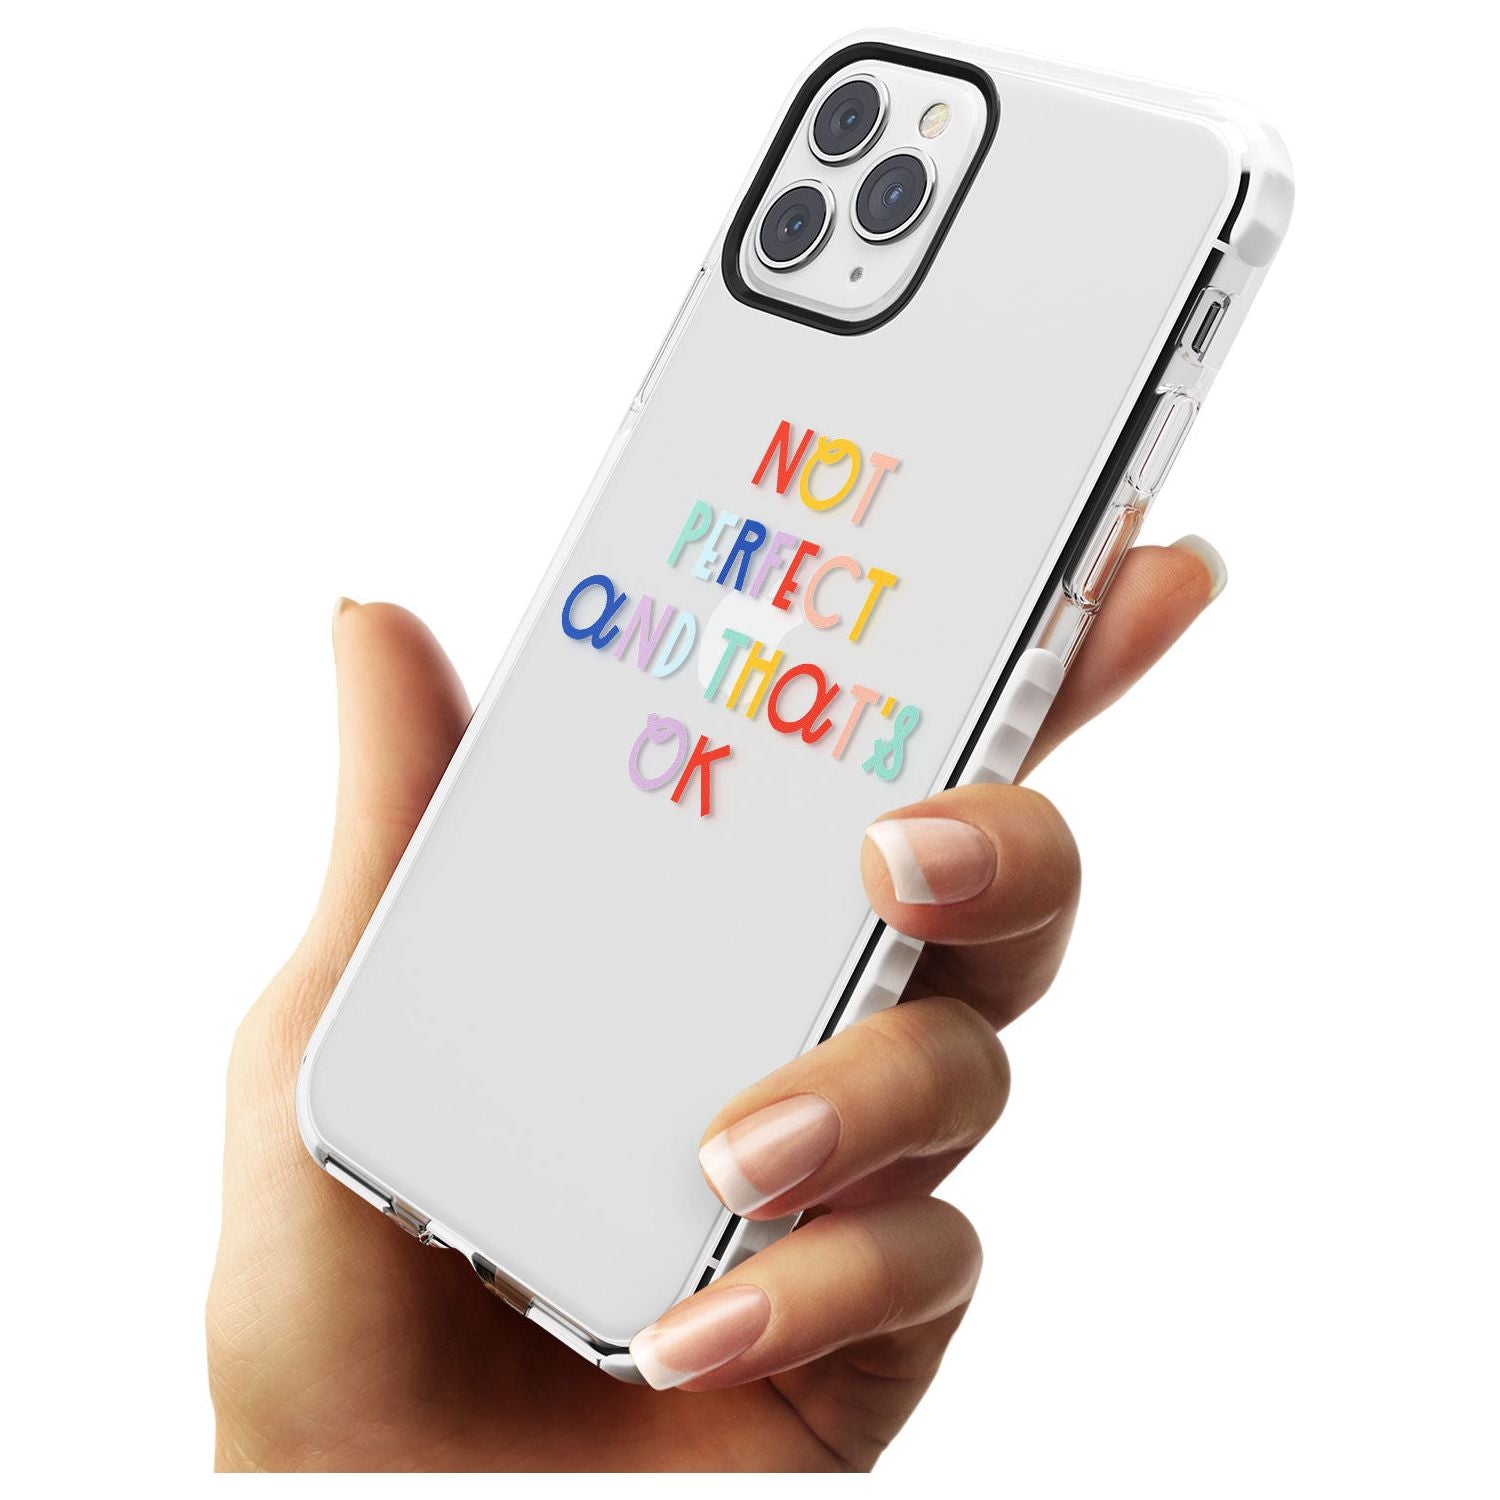 Not Perfect - Clear Impact Phone Case for iPhone 11 Pro Max